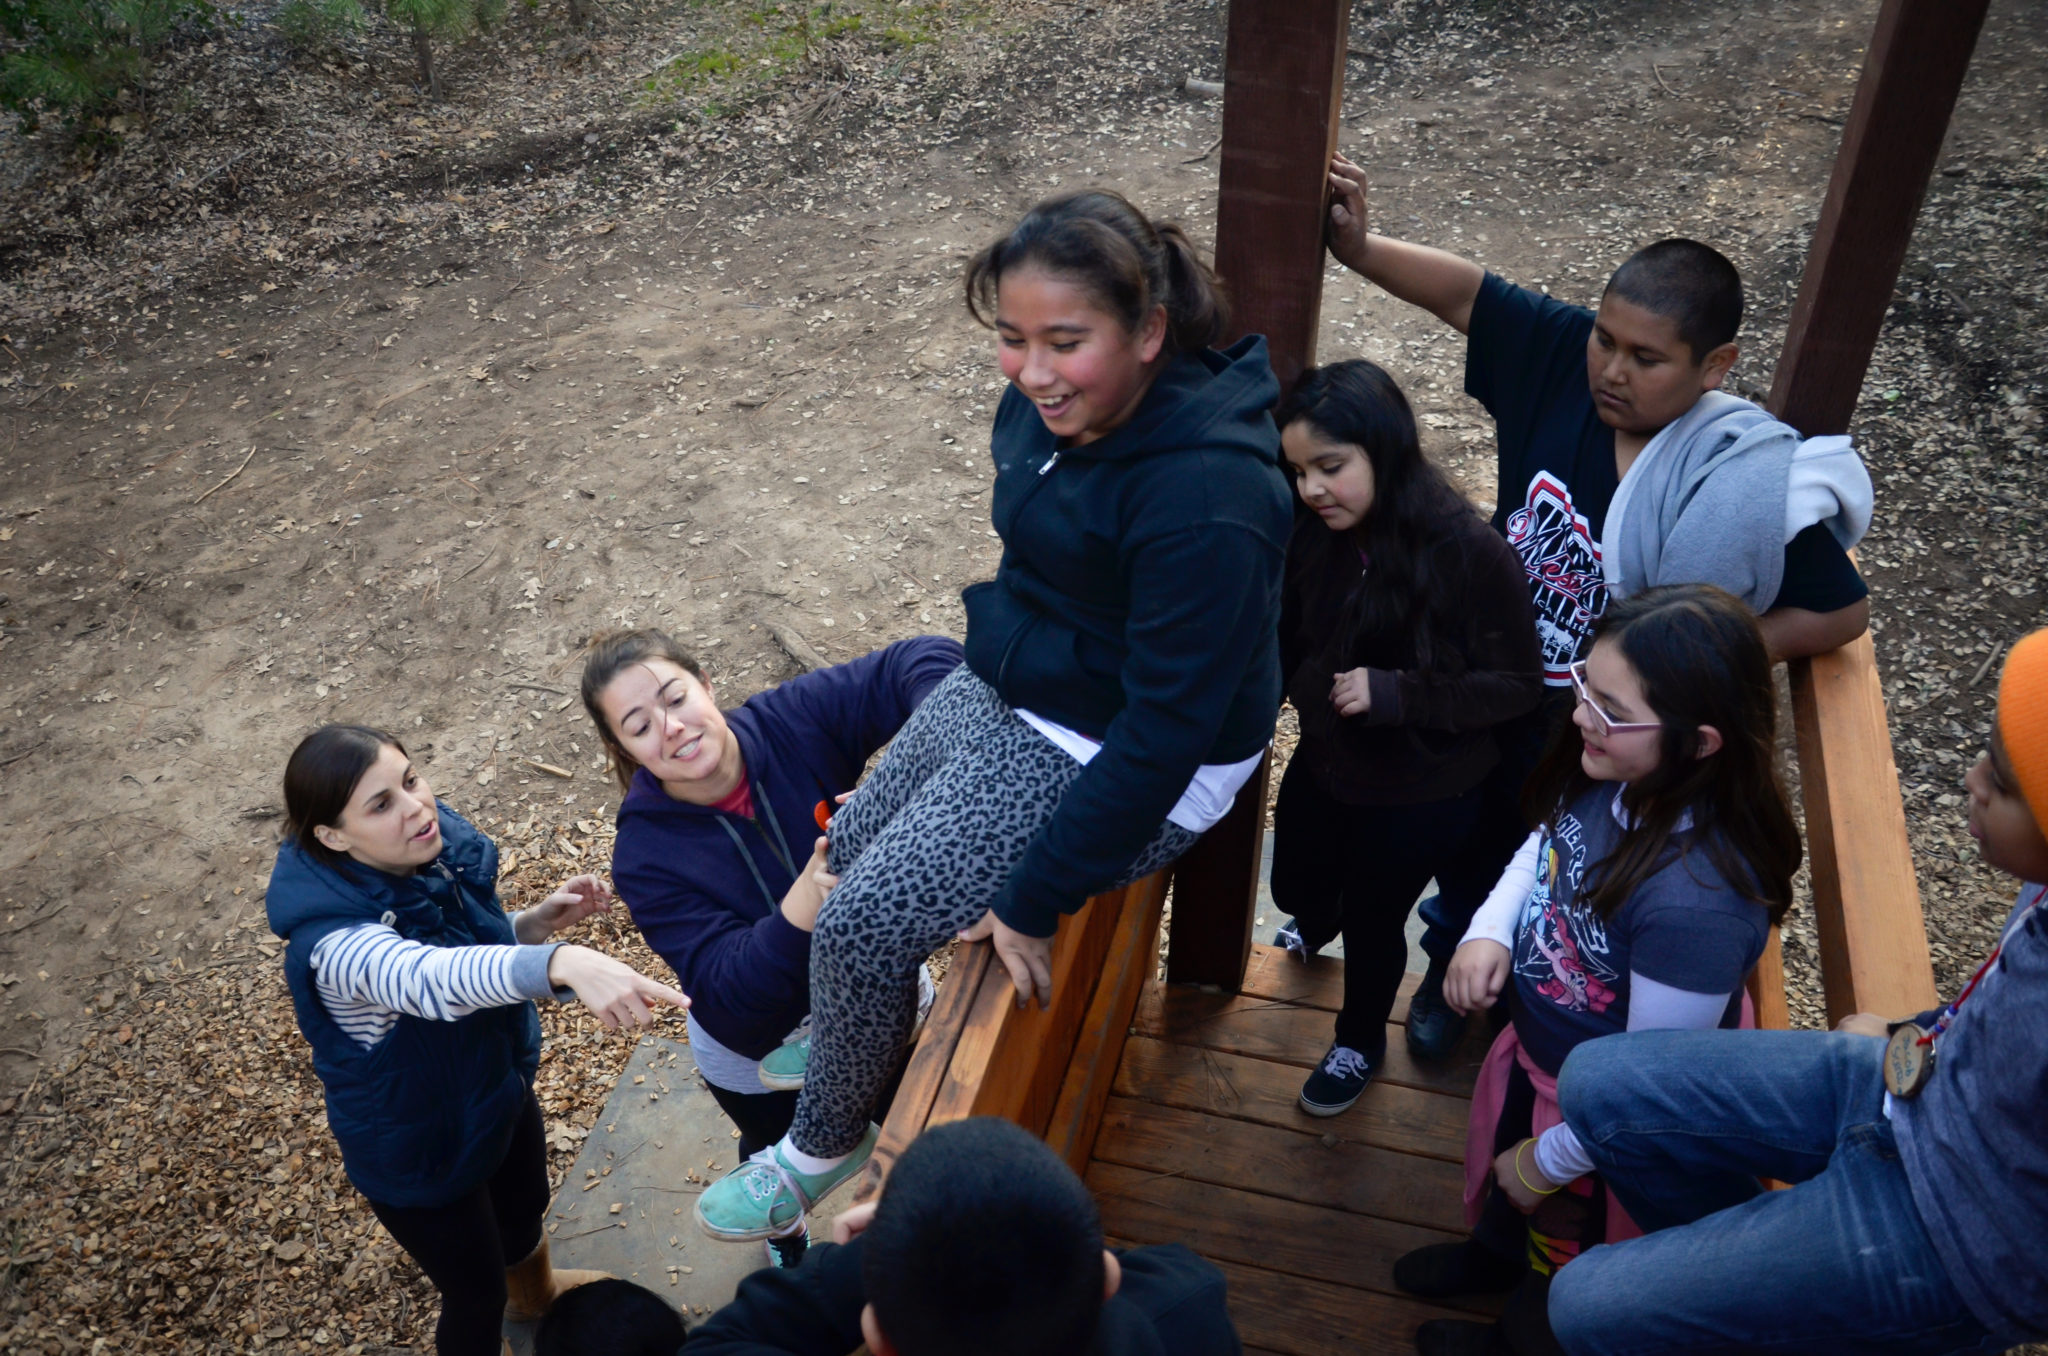 Ms. Merz (far left) and Ms. Johnson (right of Ms. Merz) designed science camp at Tuolumne Trails four years ago. While teachers for different schools take the lead for their respective camps, Johnson and Merz took the lead to ensure our Rocketeers could all enjoy this unique opportunity. 